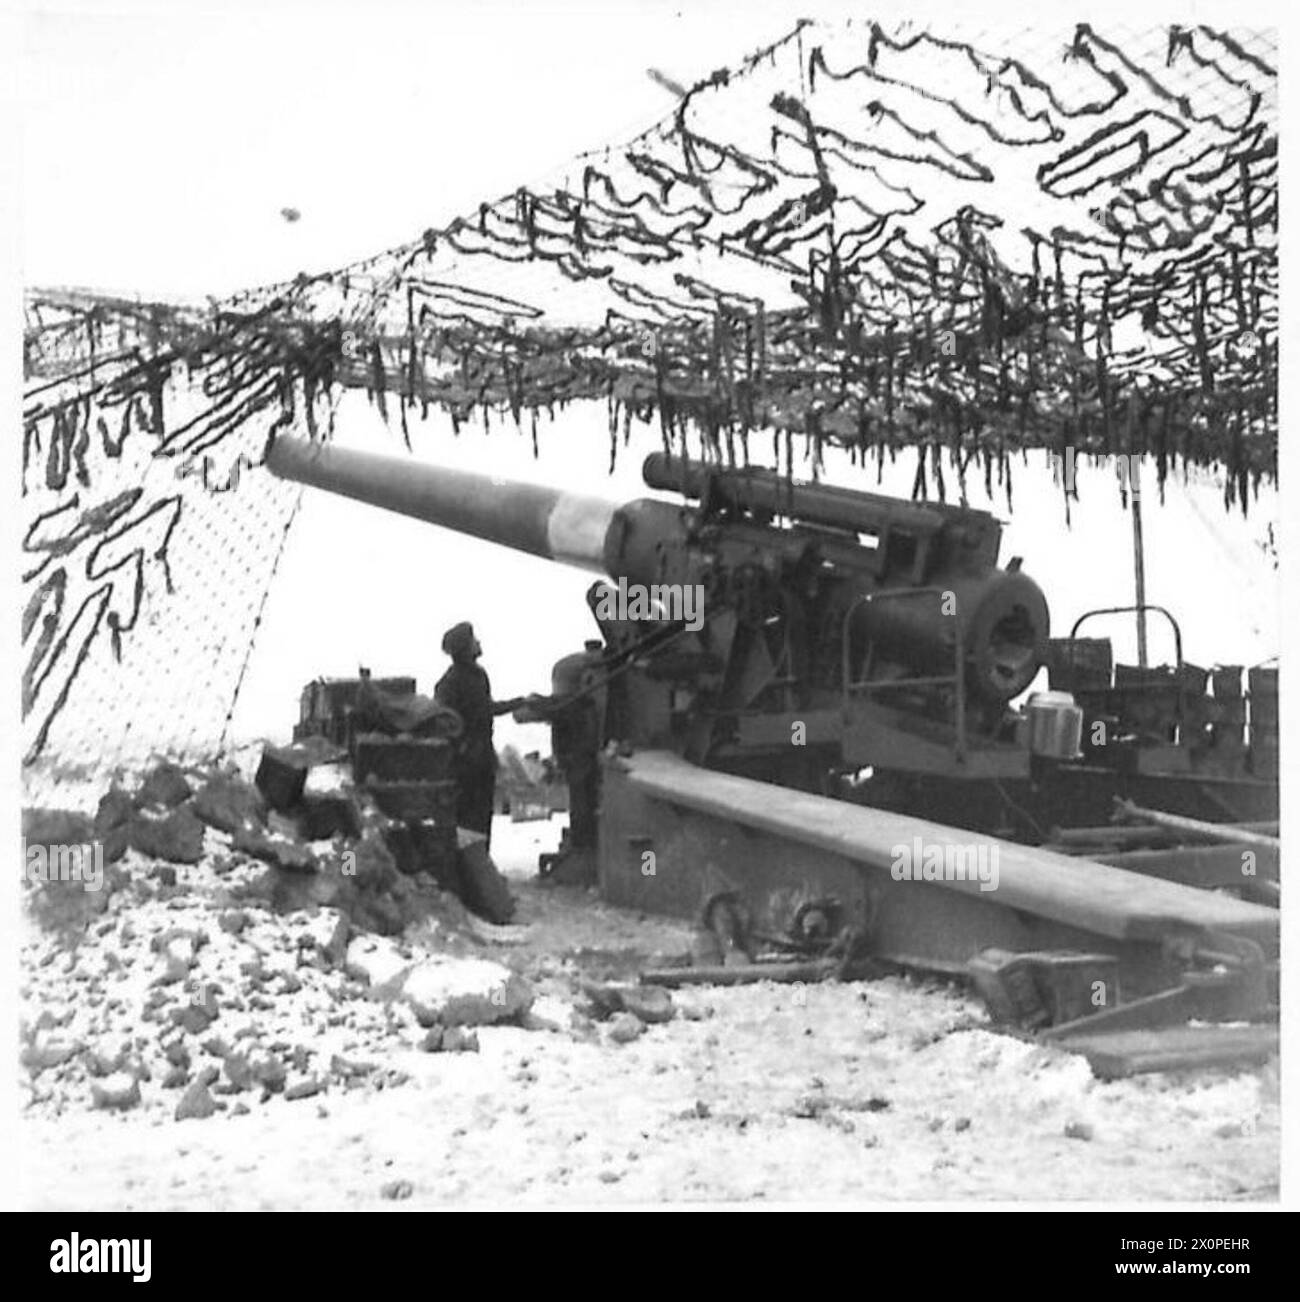 MISCELLANEOUS - The 240 mm gun which is blasting Germany. Photographic negative , British Army, 21st Army Group Stock Photo